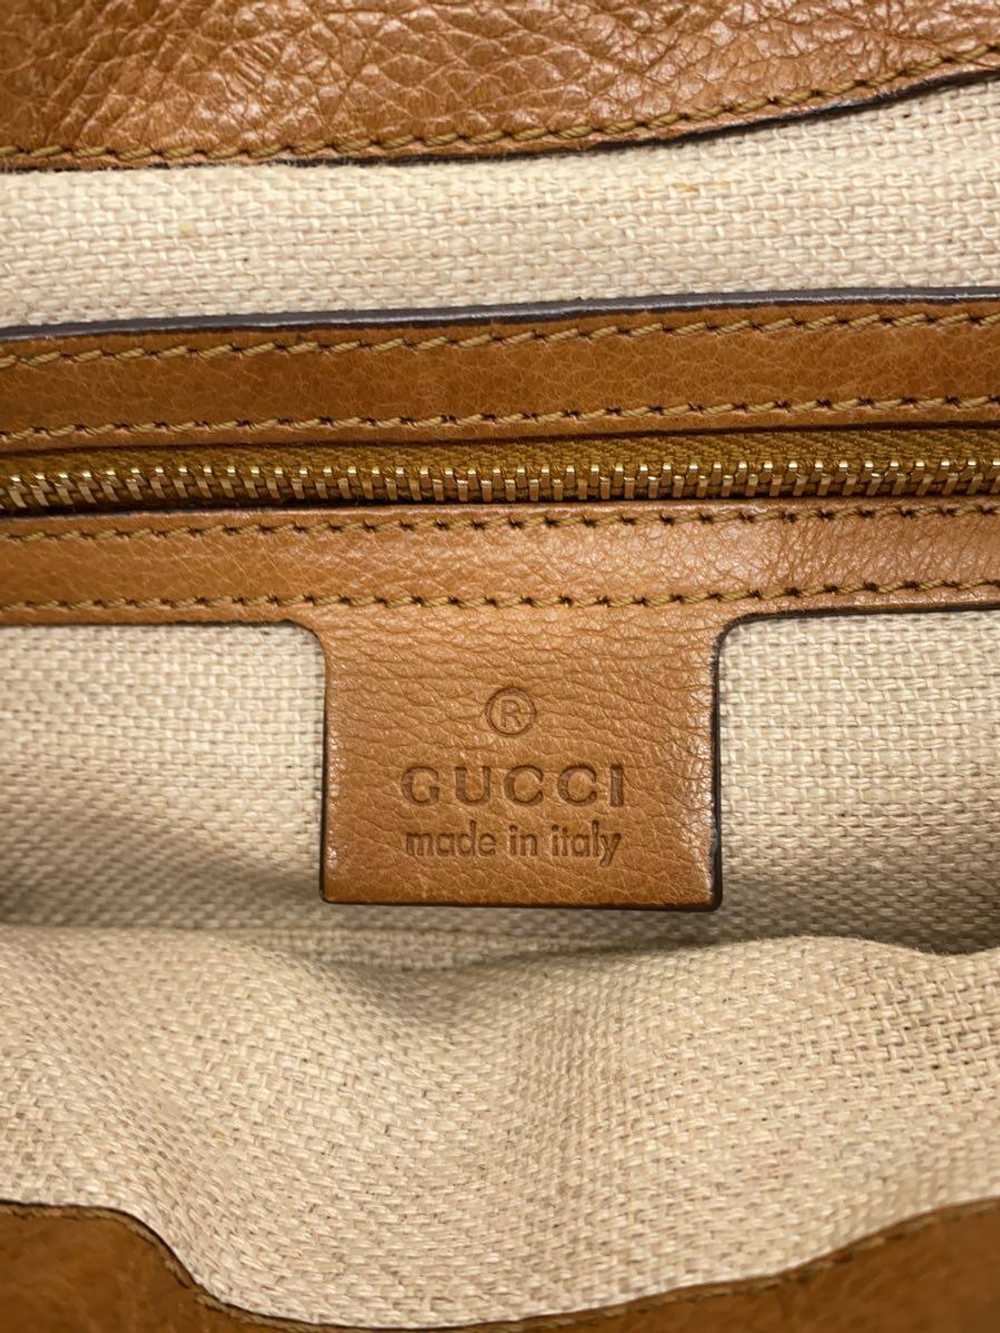 Used Gucci Marrakech/Shoulder Bag/Leather/Brw/257… - image 5